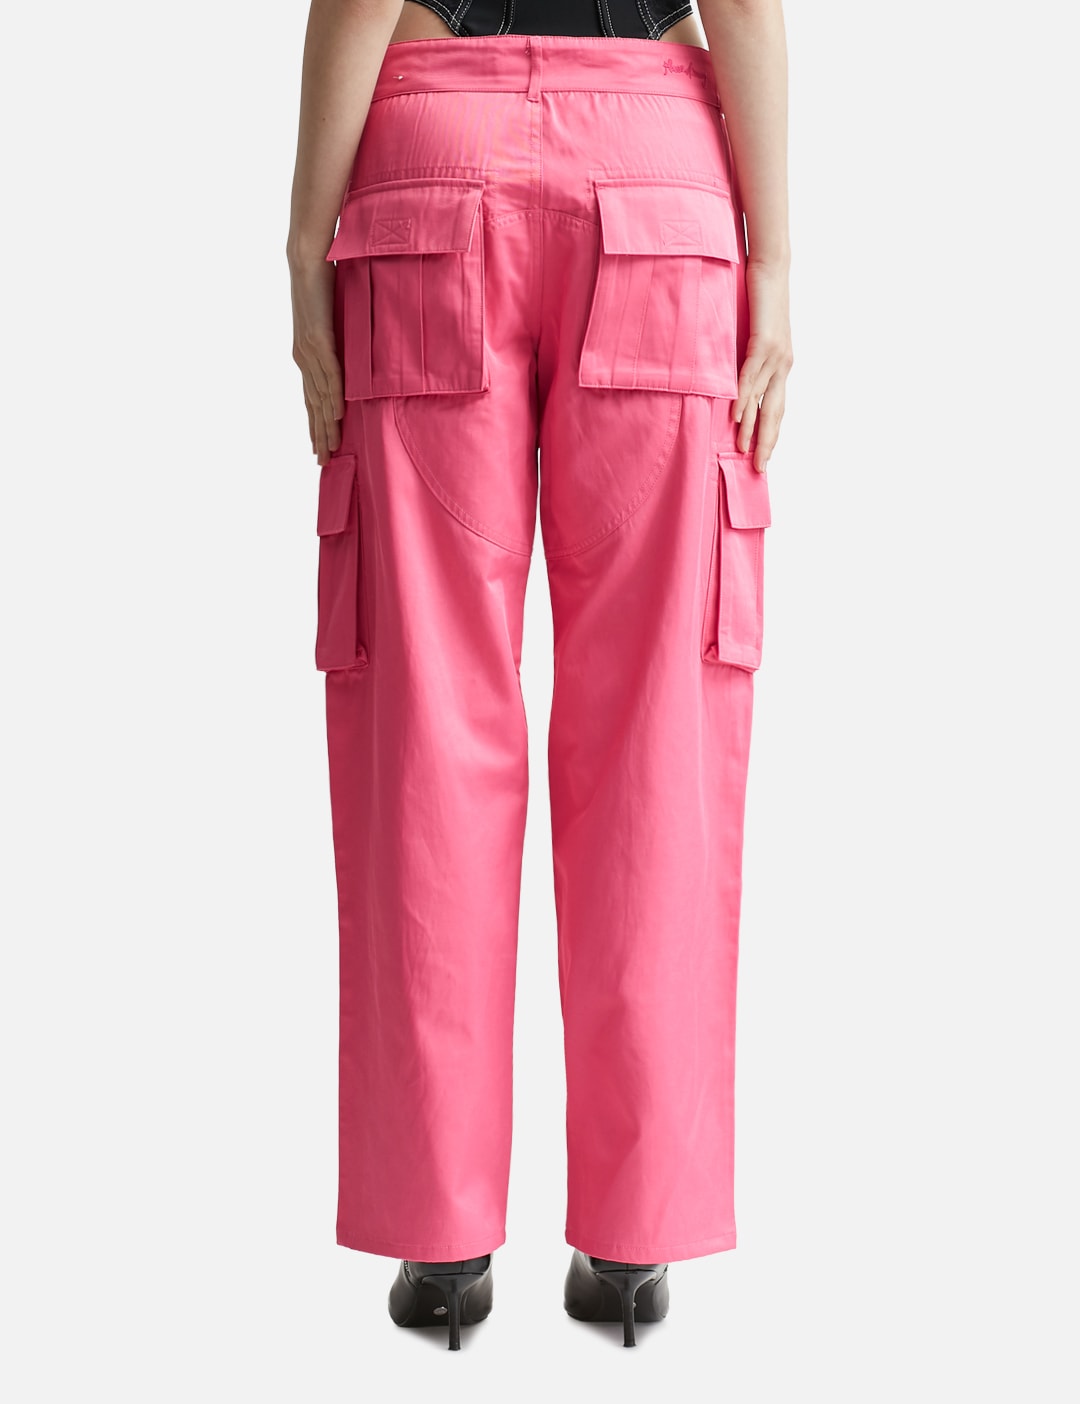 Easy Rider Cargo Pants Placeholder Image